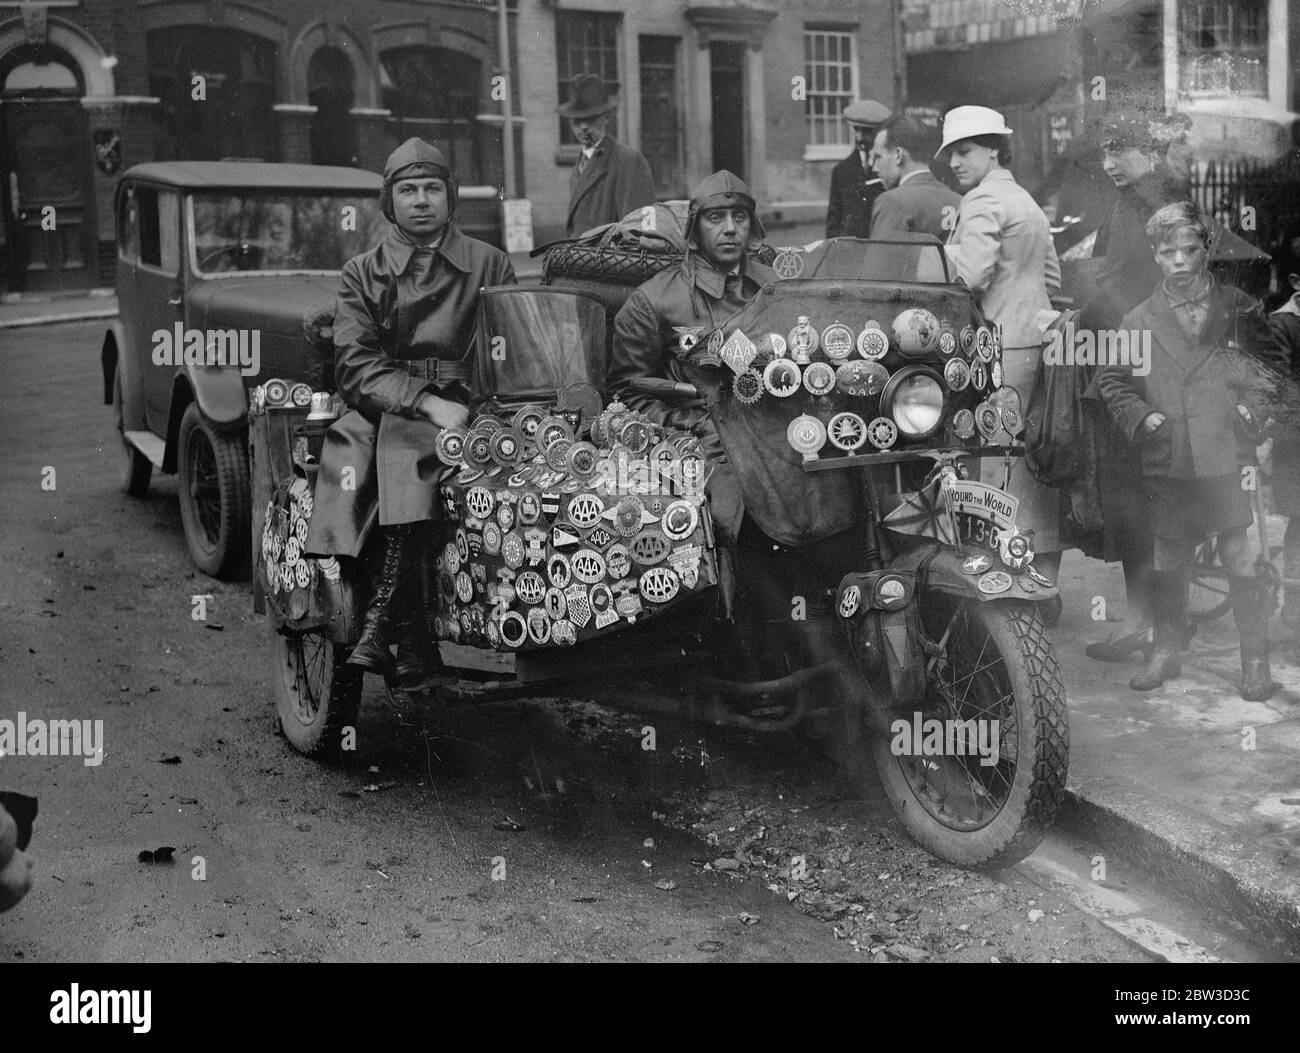 Hungarians at Southampton as they complete world motor cycle tour , 95 , 000 miles in 63 countries . Zoltan Sulkowsky and Gyula Bartha of Budapest , Hungary , arrived at Southampton as they neared the end of what they claim to be the first complete round the world tour by motor cycle . They had covered 95000 miles , passing through 63 countries of Europe , Africa , Asia , Australasia and North and South America . The last three months they have spent covering 4000 miles in the British Isles . Now they are making their way back to Budapest via Belgium , Holland and Germany . Sulkowsky and Barth Stock Photo